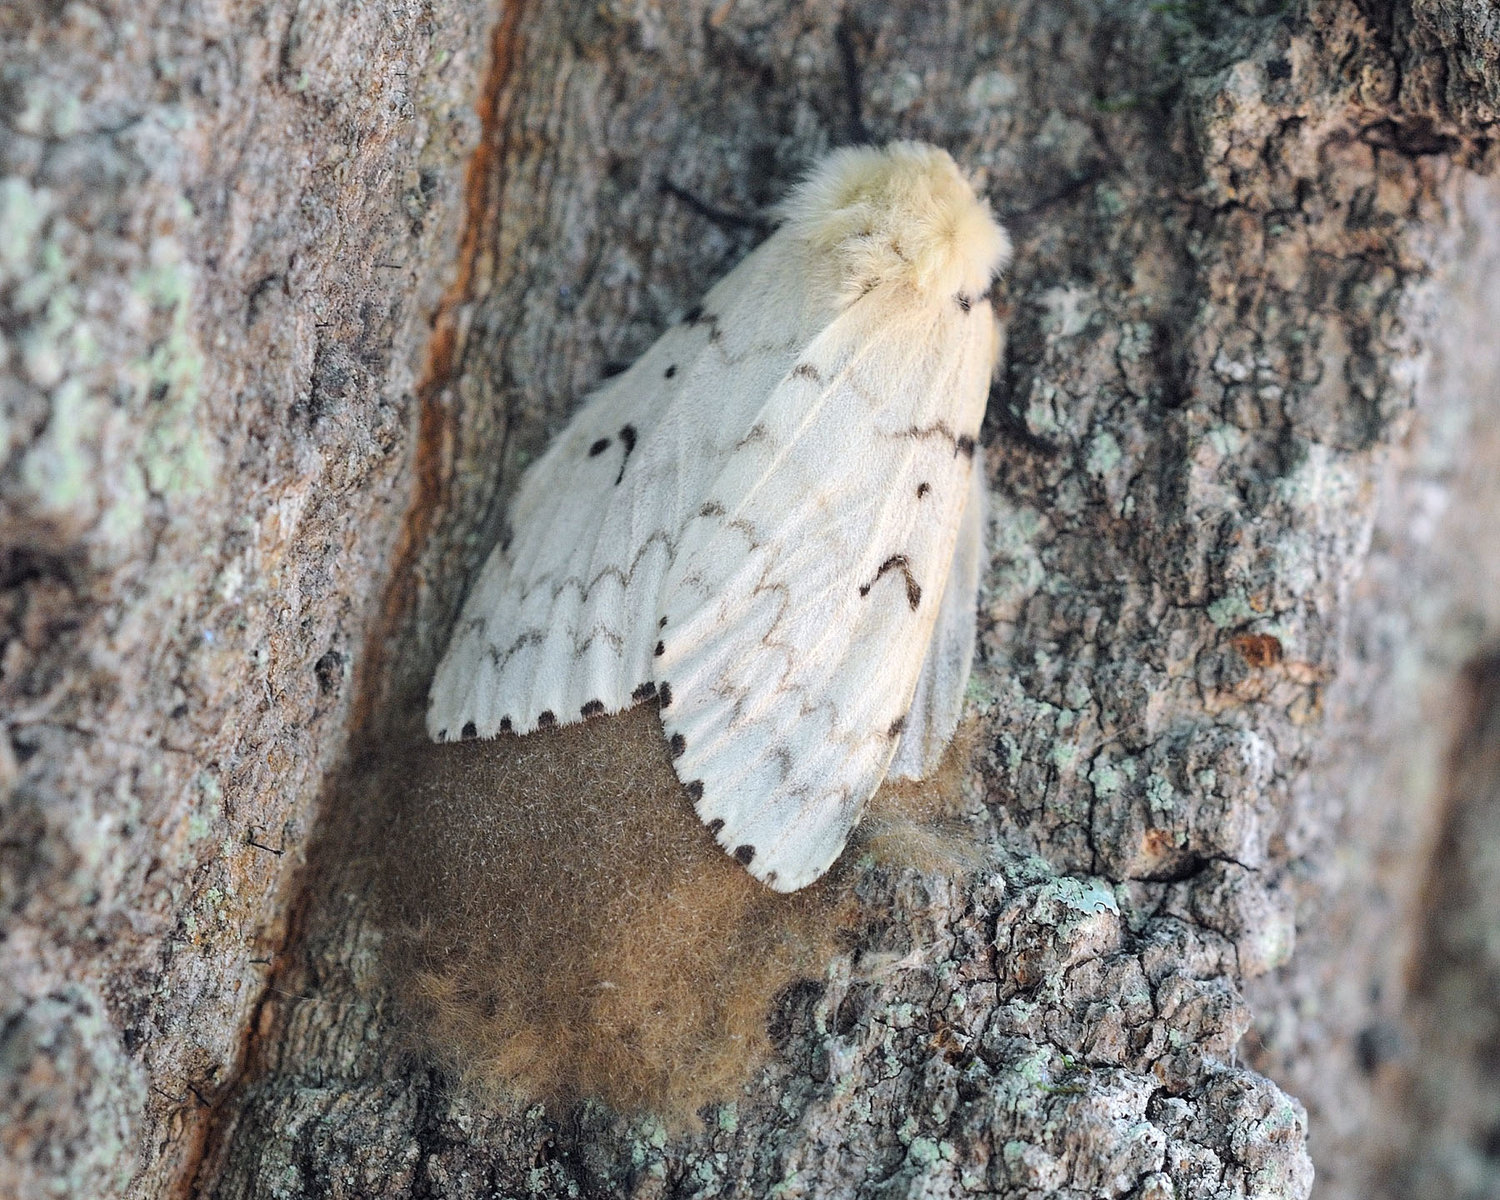 This female adult spongy moth is in the process of laying its eggs during July of last year. Spongy moth egg masses may contain up to 400 to 600 eggs embedded in a fibrous matrix that appears and feels “spongy,” which is likely the source of the new name. The off-white female does not fly as an adult; she waits for one of the many flying light-brown-colored male adults to mate with her. She then lays her eggs and dies soon after..........................